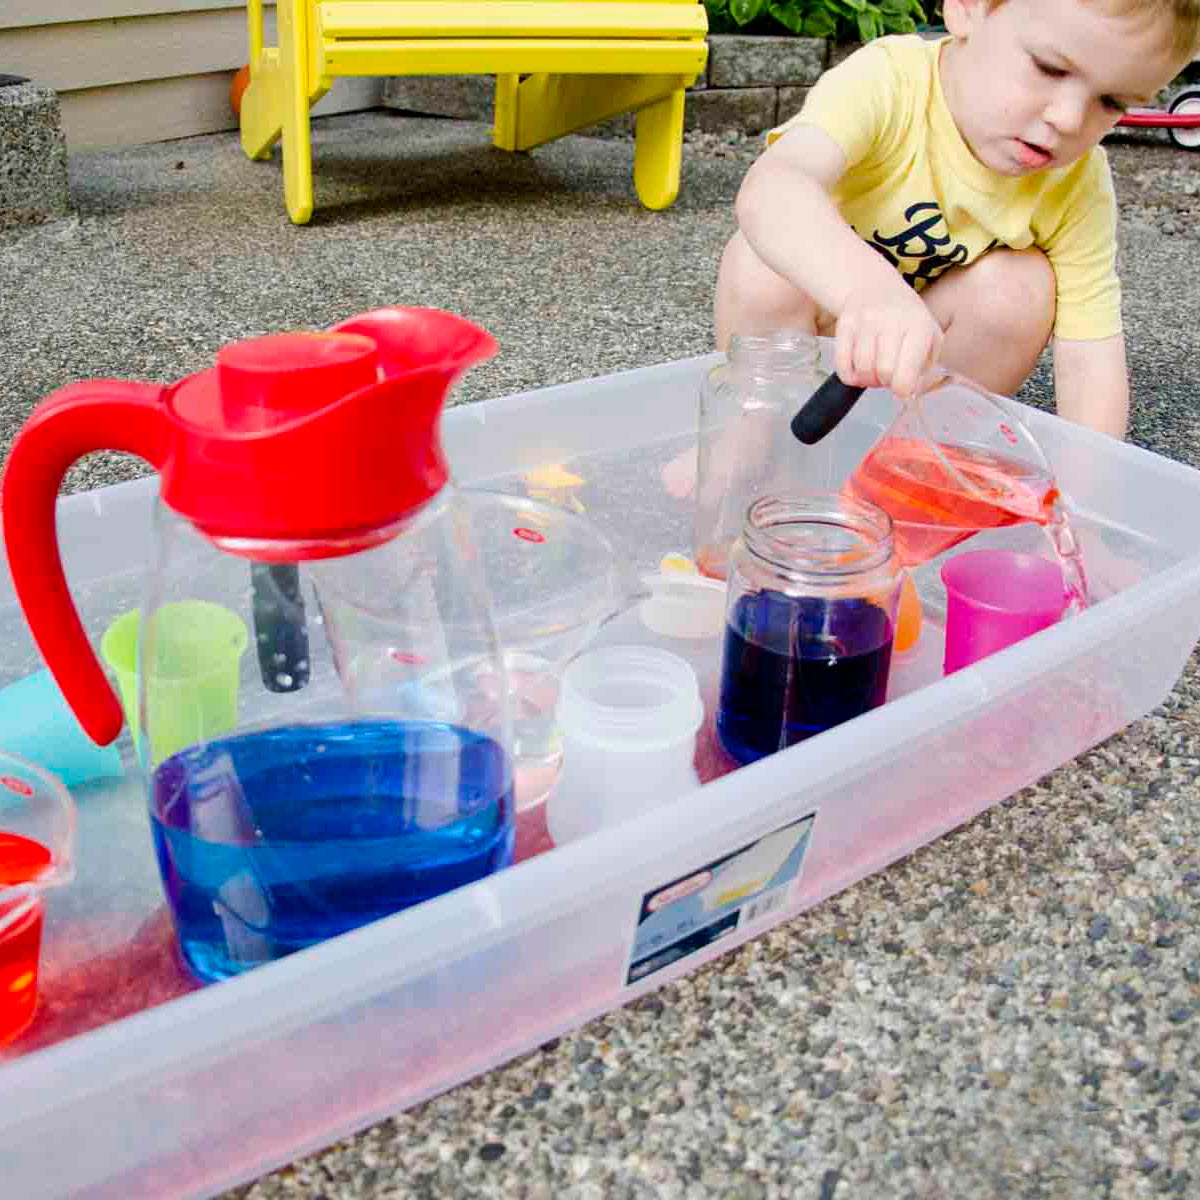 A child in a yellow shirt leans over a storage container full of cups and water. He's pouring orange water into a cup, and missing.